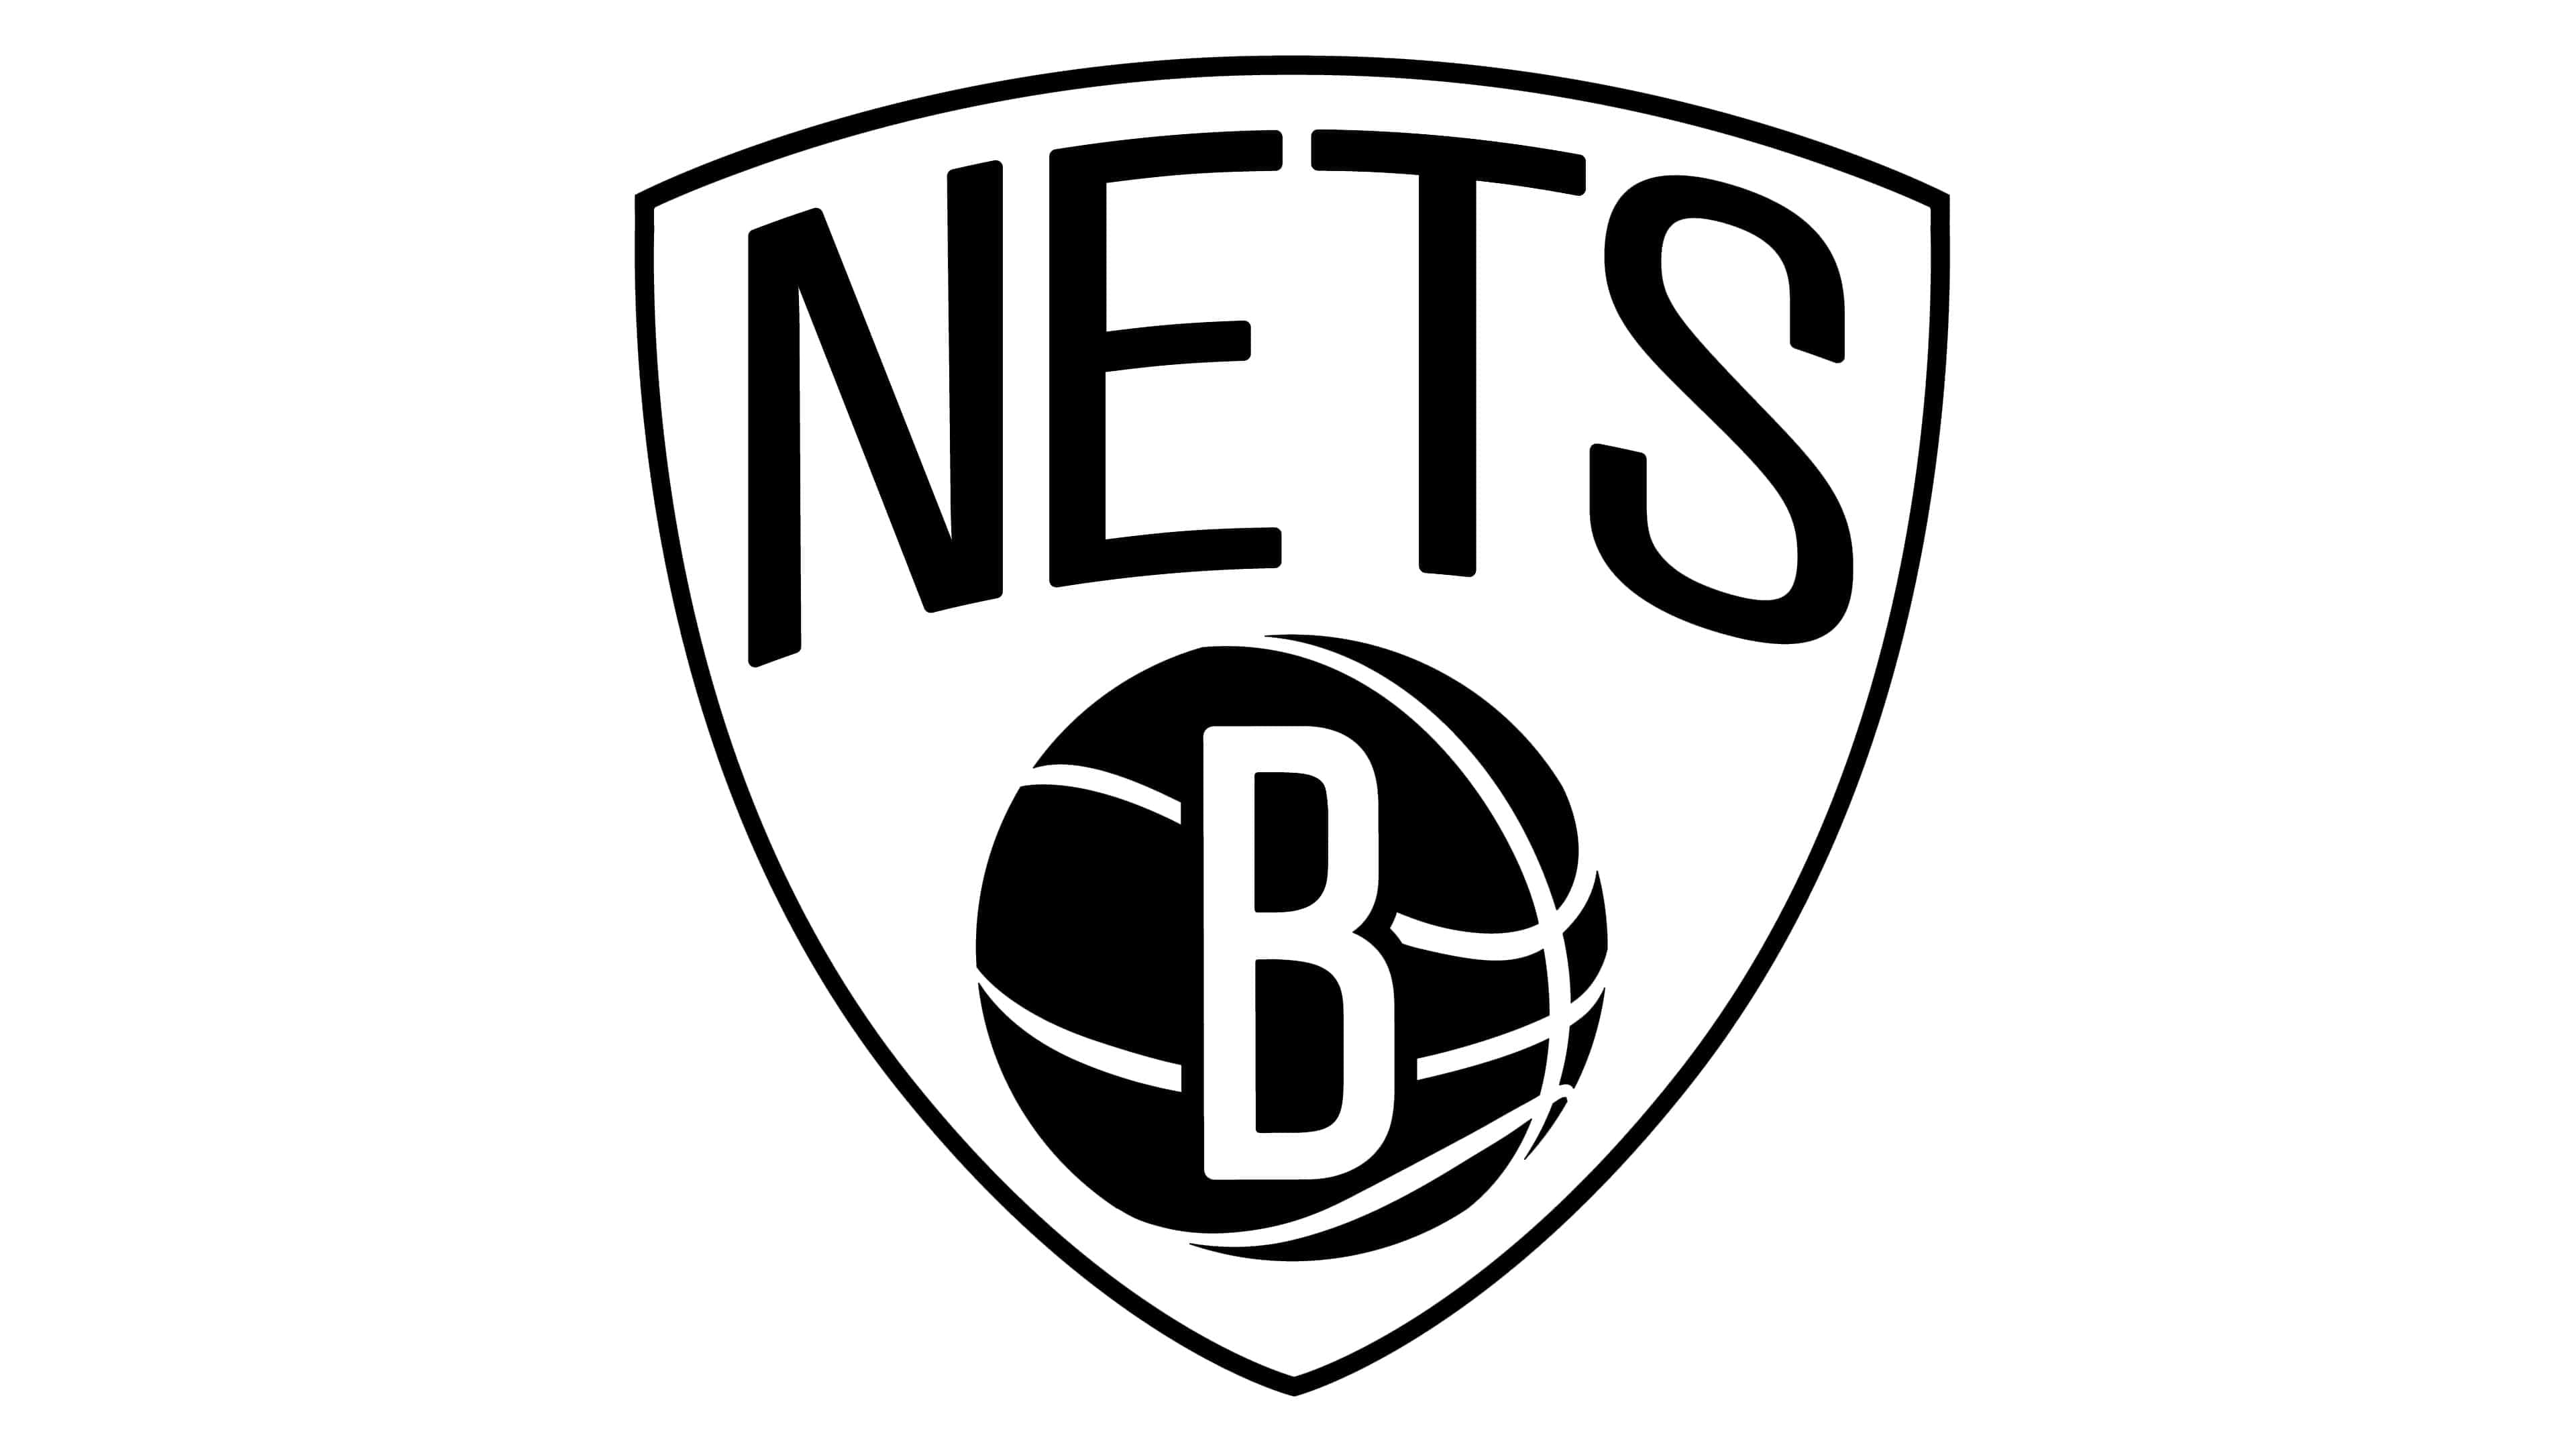 The Nets “Jewish Heritage Night” T-Shirts Have Hebrew Spelling